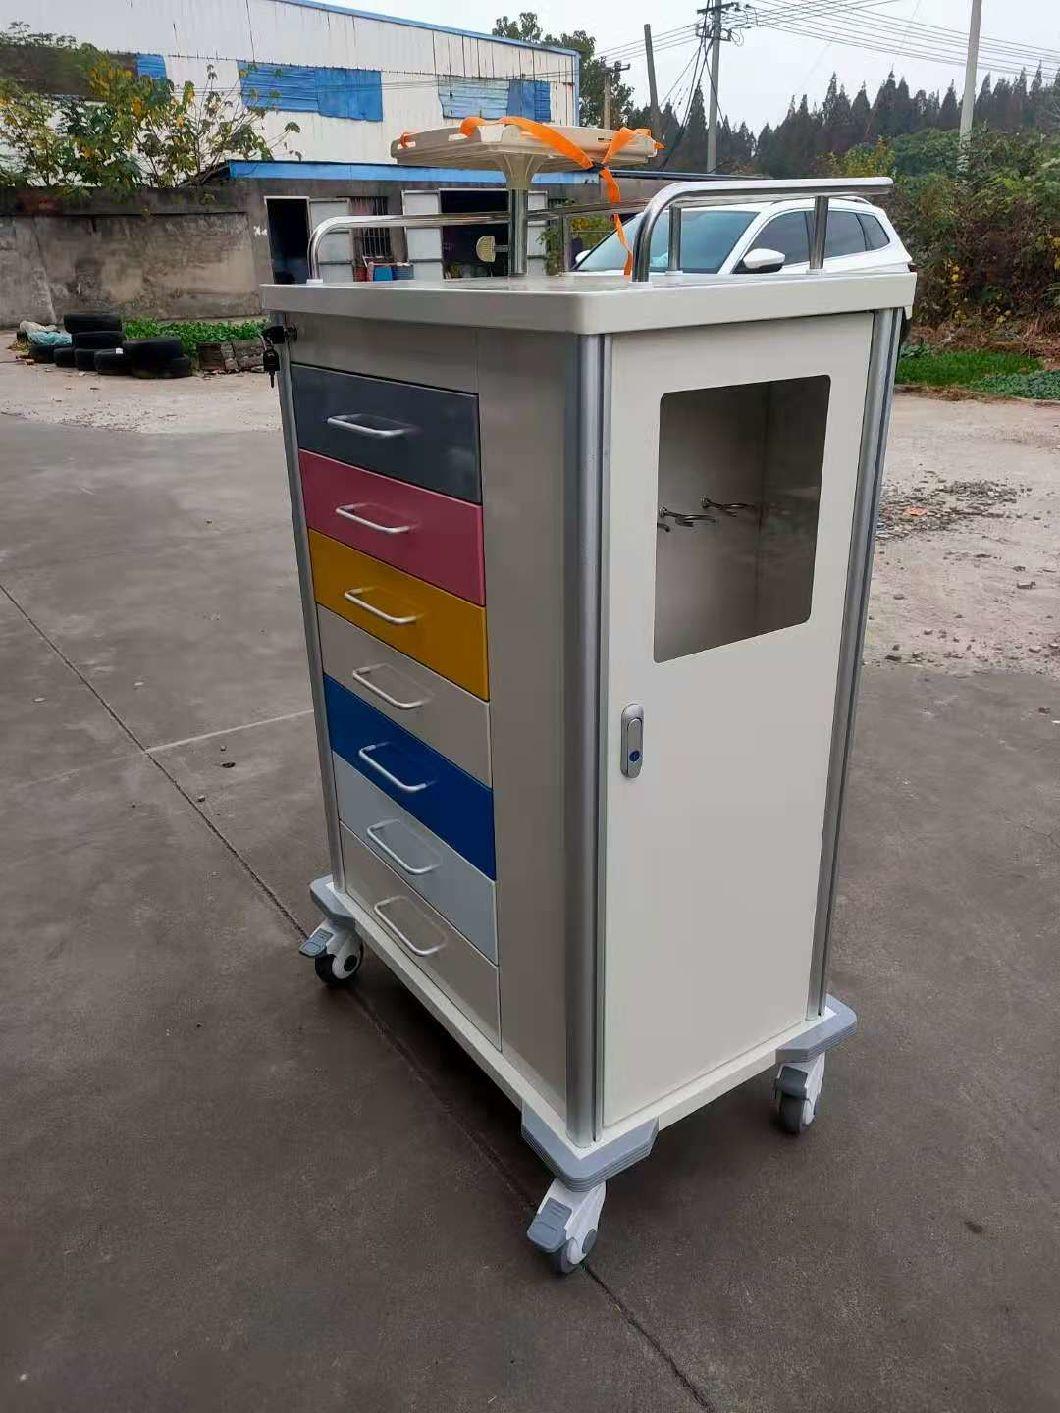 Hospital Mobile Plastic Emergency Anesthesia Care Trolley with Drawer ABS